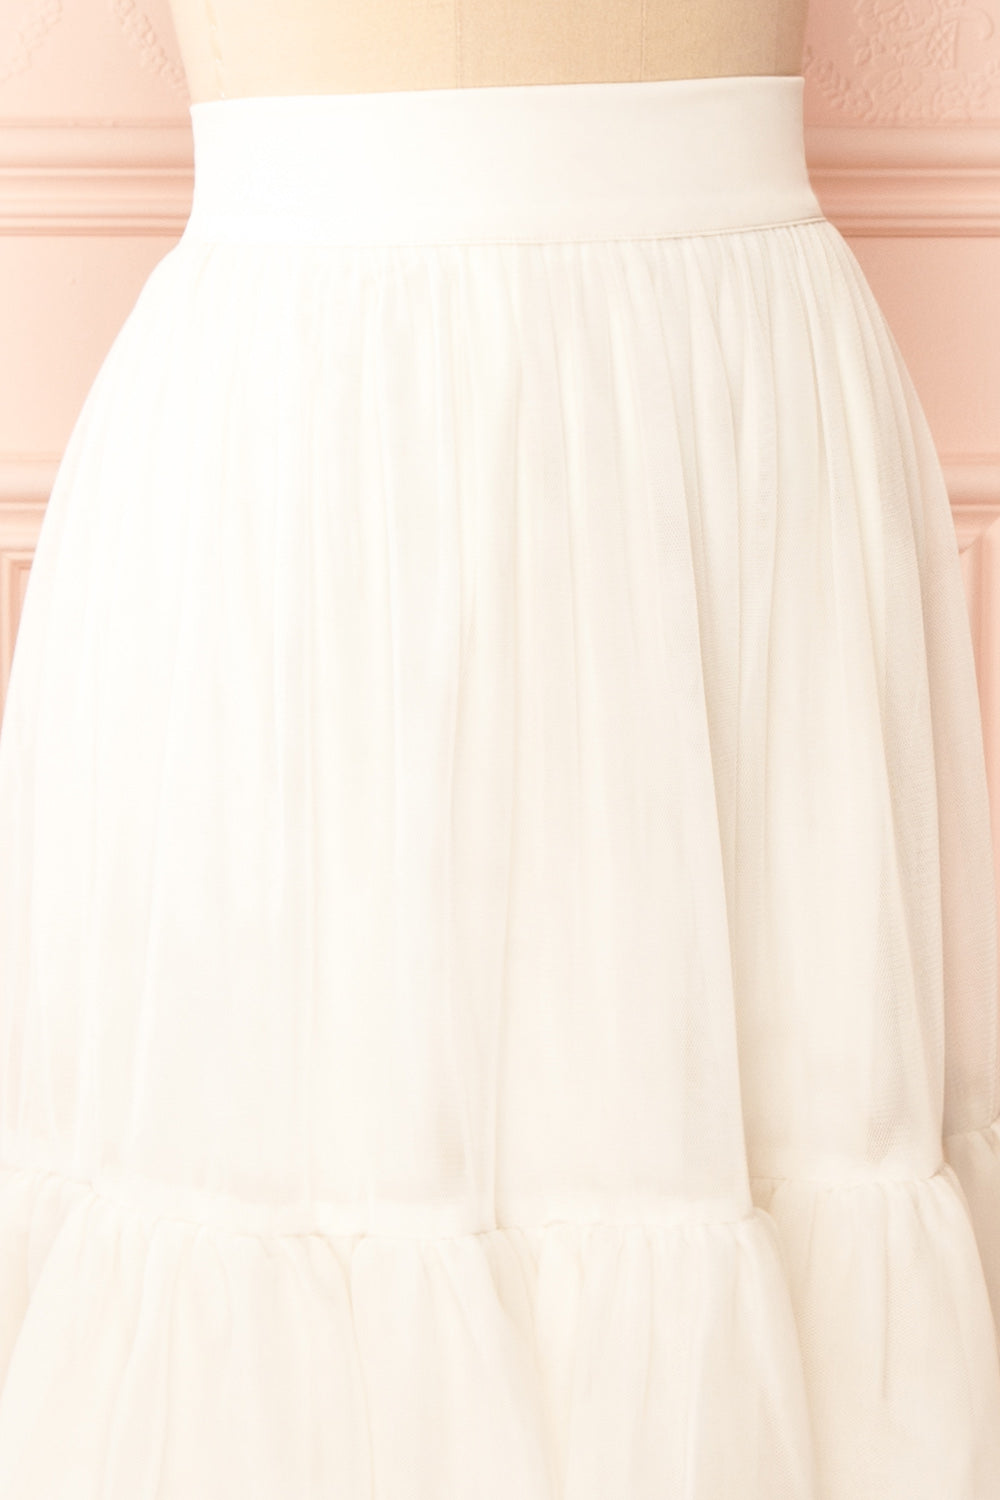 Ariette Ivory High-Waisted Tiered Tulle Skirt | Boutique 1861